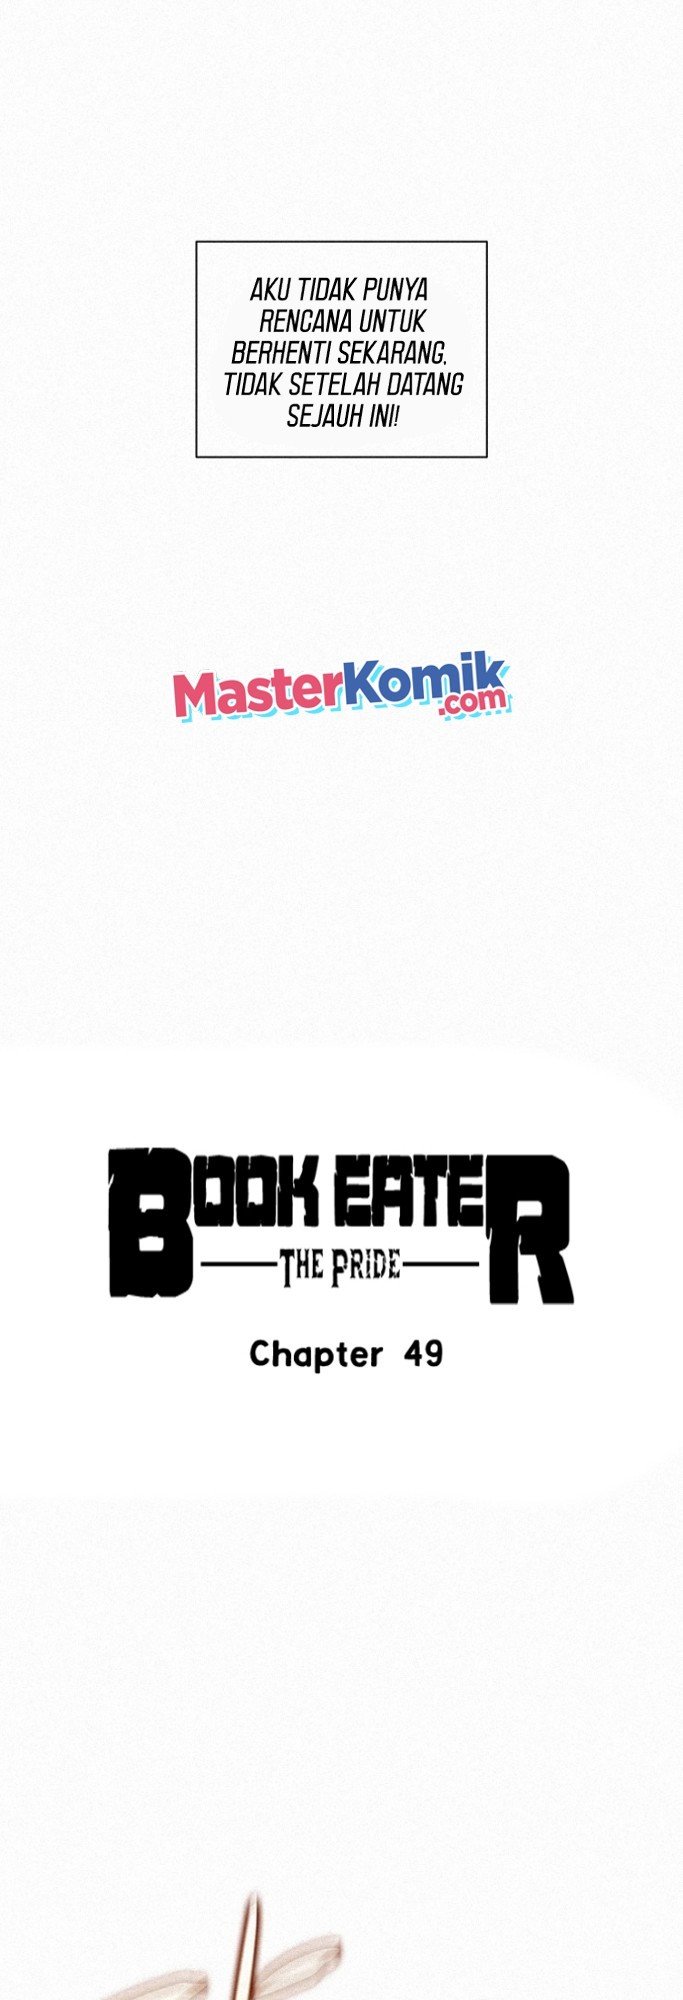 The Book Eating Magician (Book Eater) Chapter 49